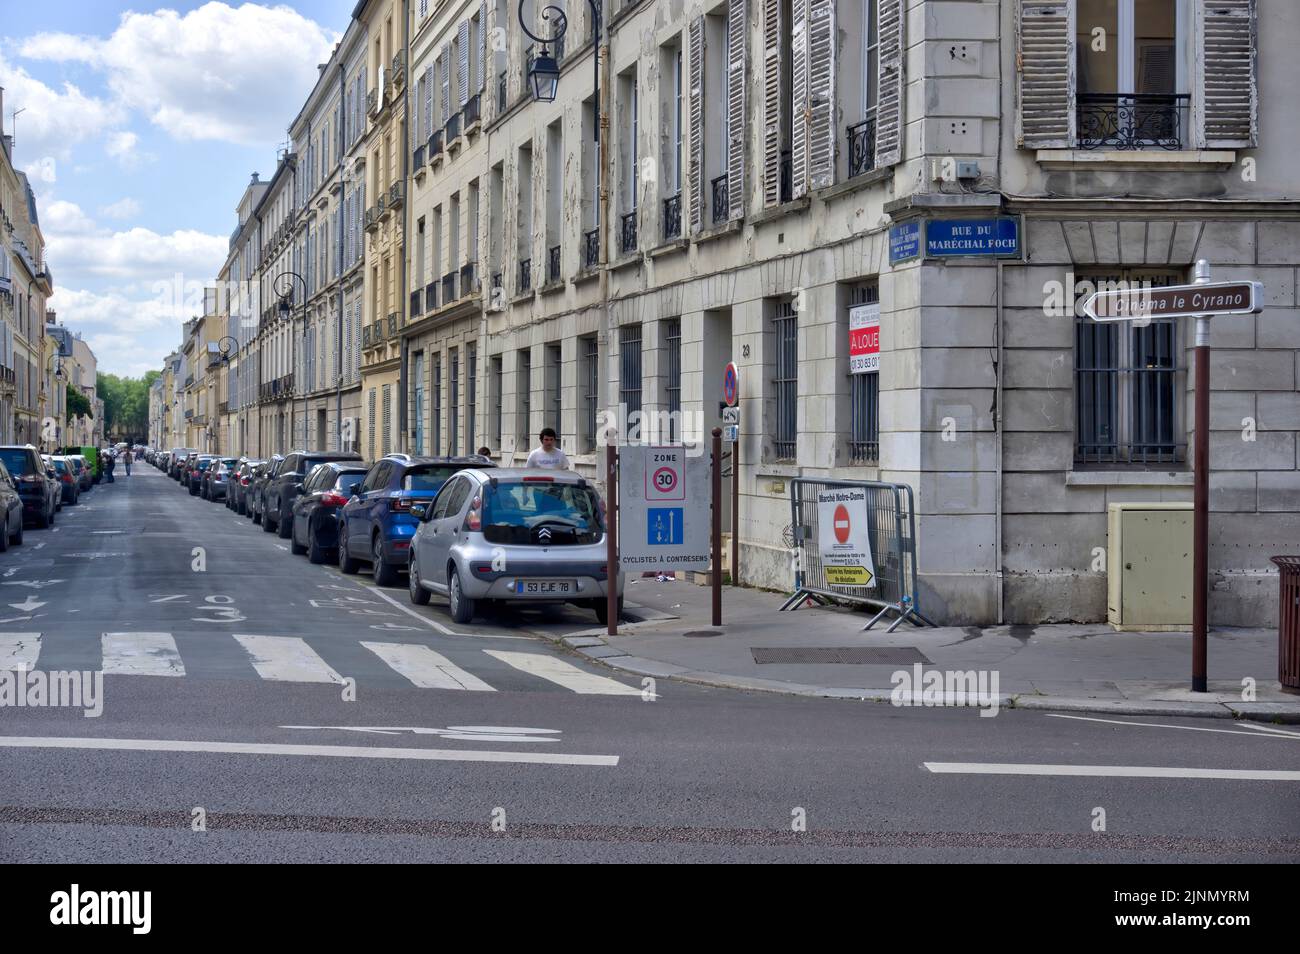 Versailles, France - May 28, 2022: Typical French street with old residential buildings in poor decorative order and some motion blurring Stock Photo